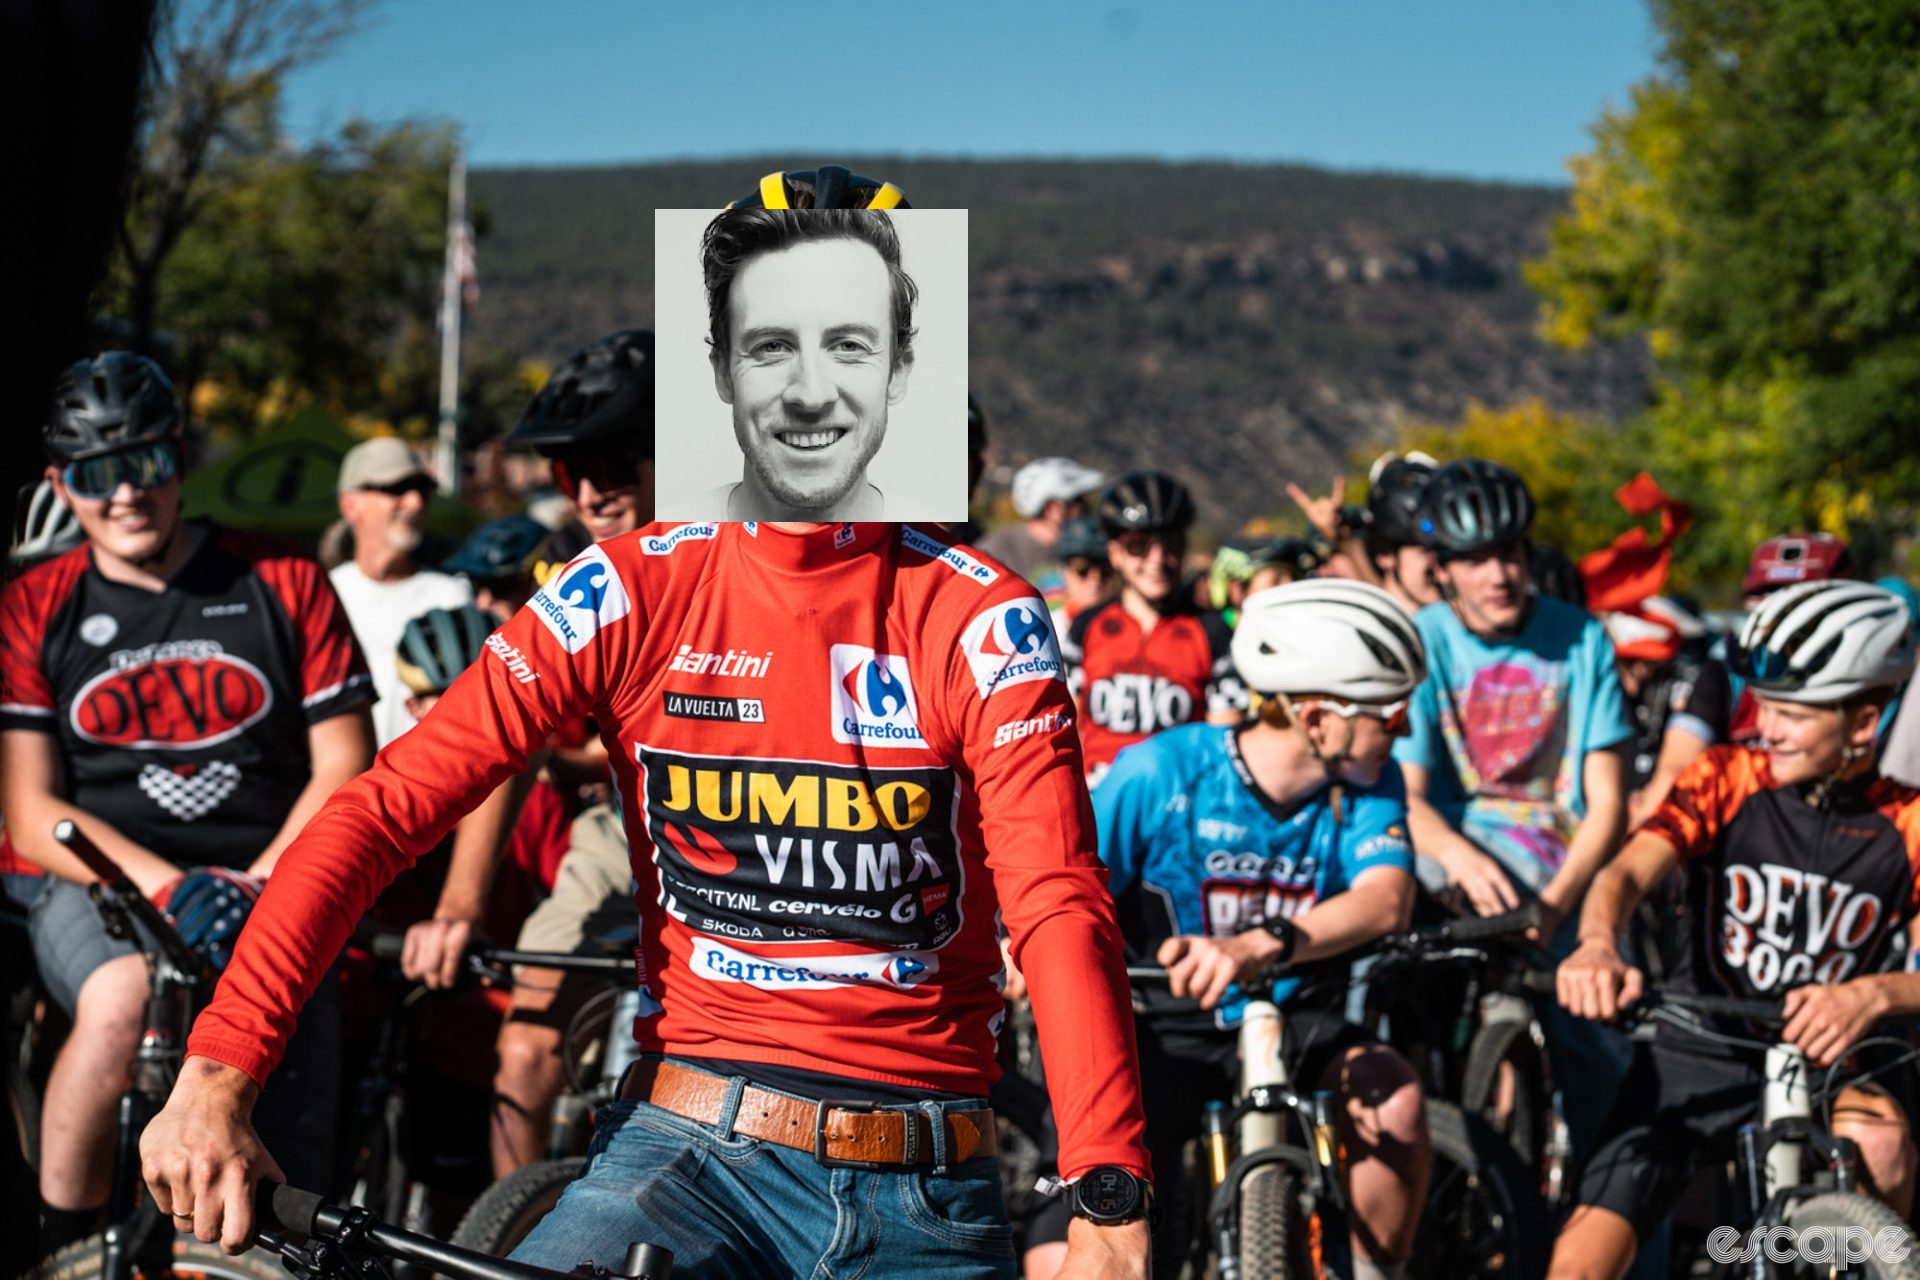 Sepp Kuss gets ready to lead the bike parade in Durango to celebrate his Vuelta a España win. Caley Fretz's smiling mug is jankily photoshopped over the top.